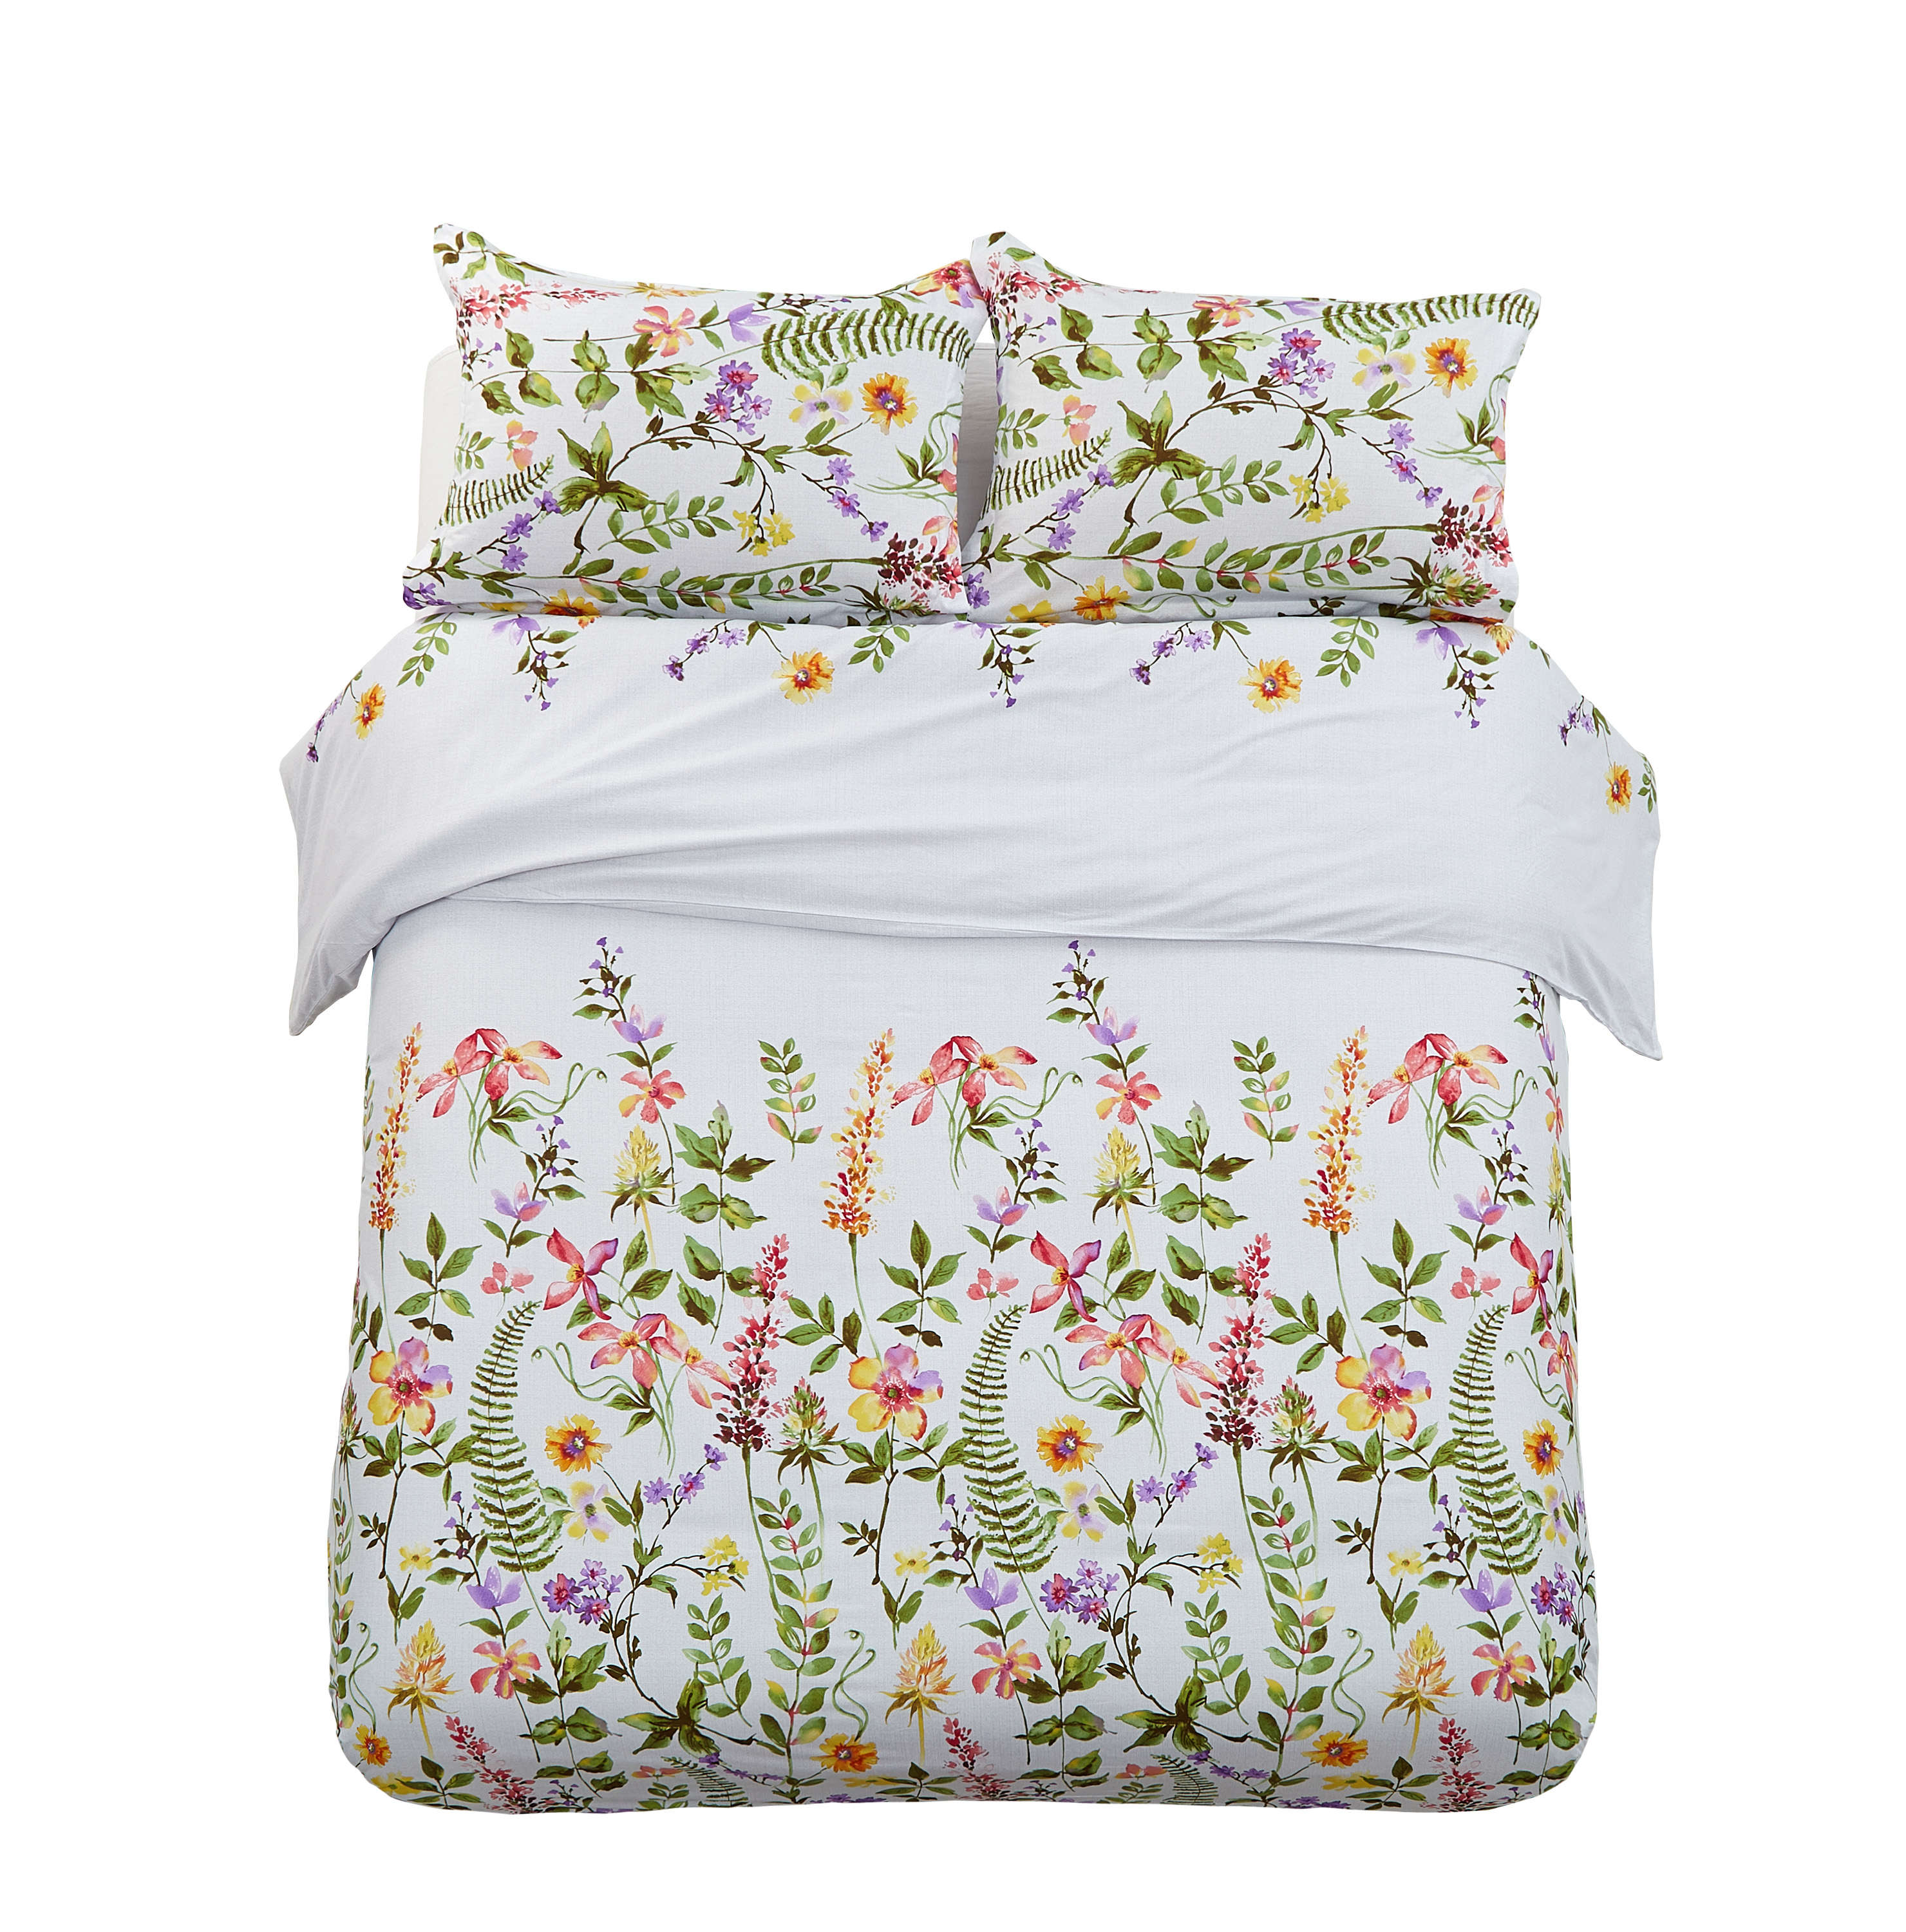 Duvet Cover Sets 3 PC Durable Brushed Microfiber Pretty Floral Print, Full/Queen